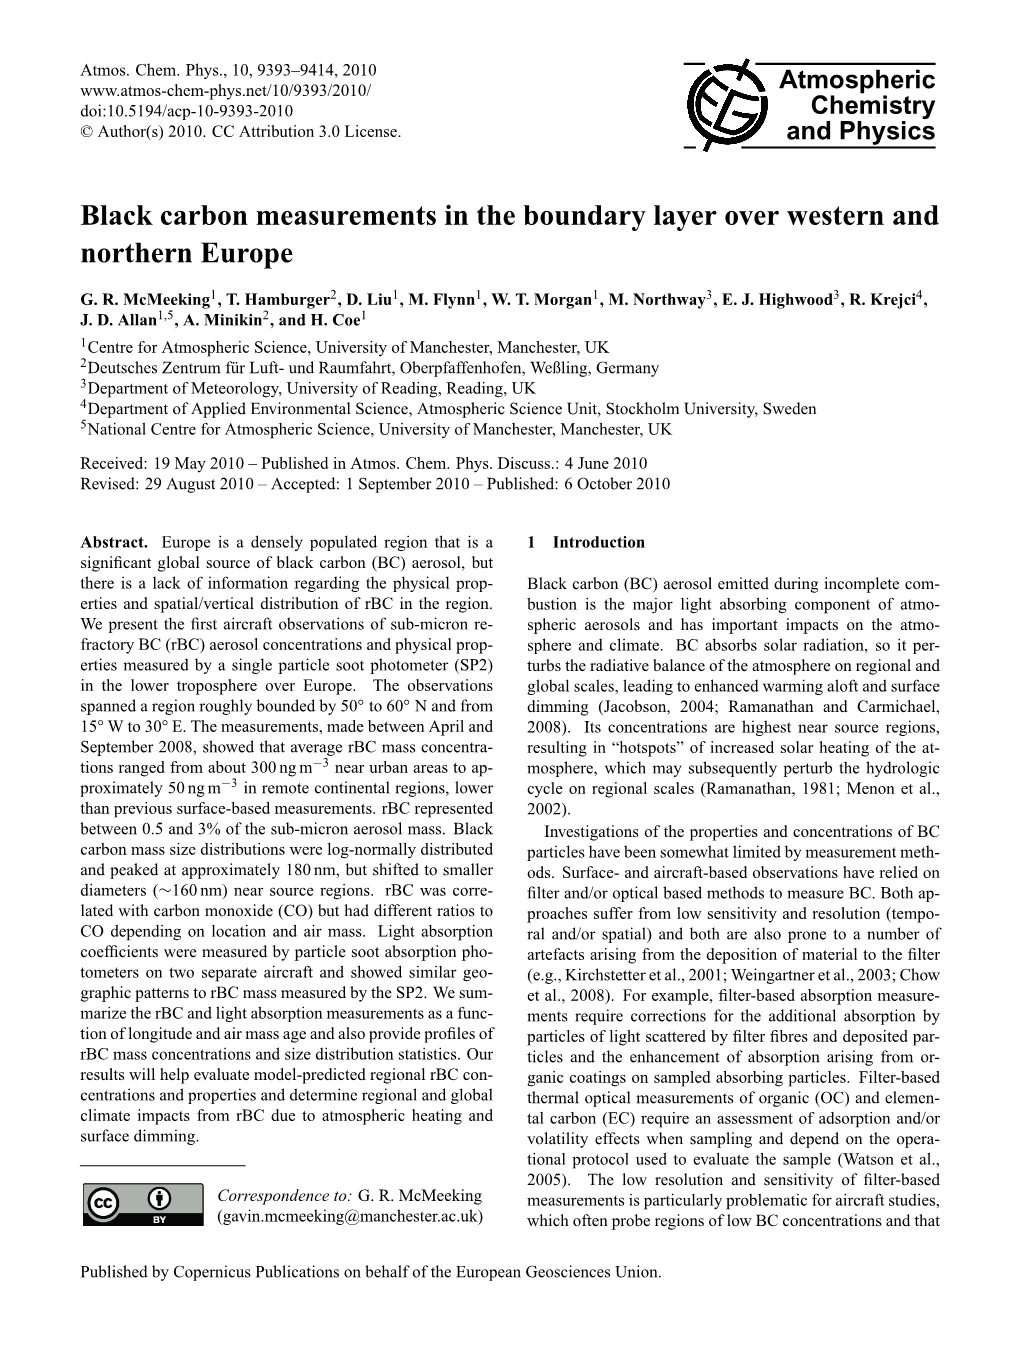 Black Carbon Measurements in the Boundary Layer Over Western and Northern Europe